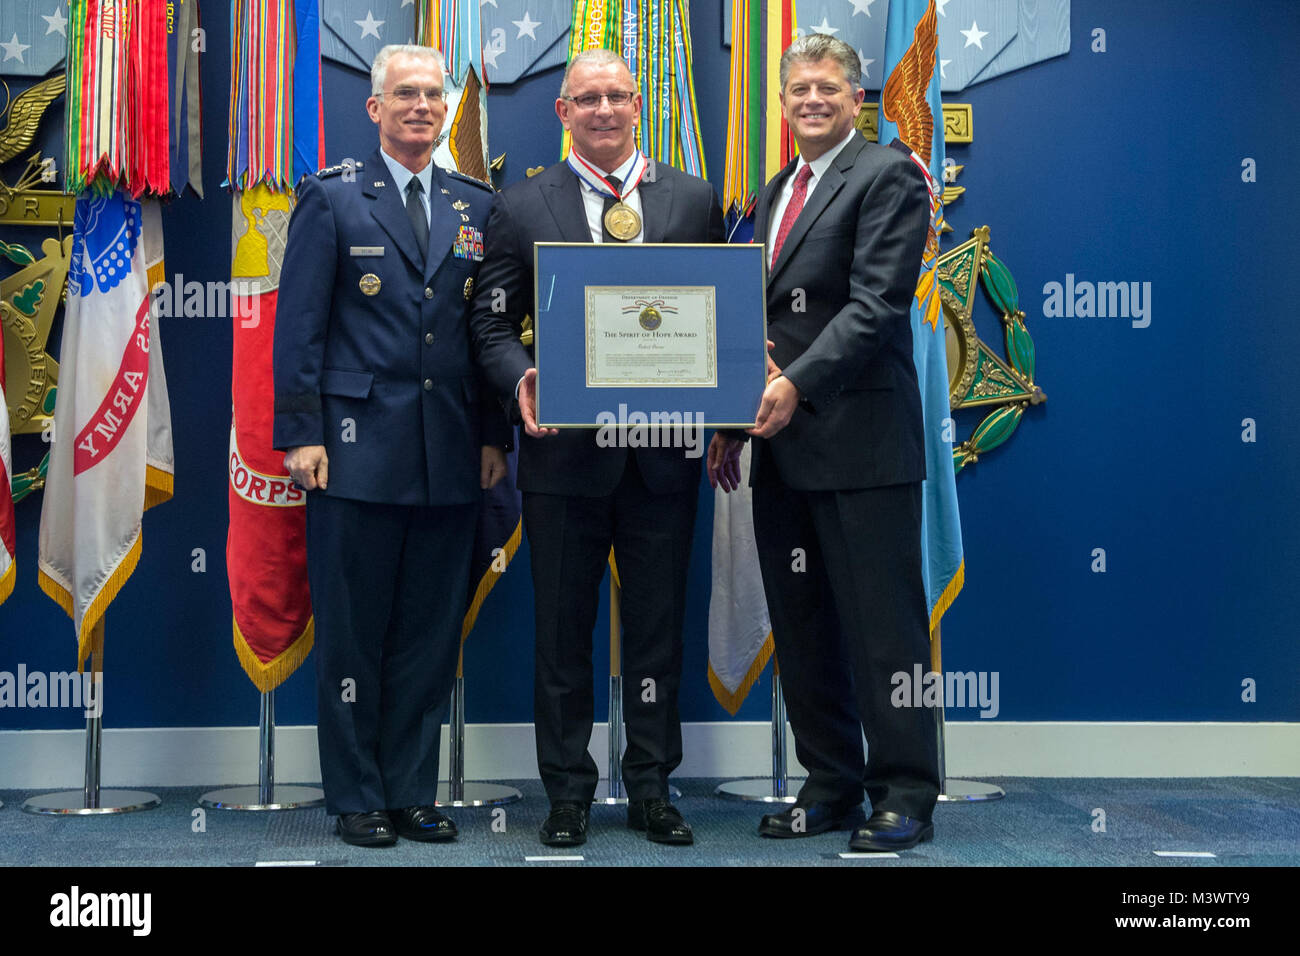 Robert Irvine, second from left, accepts The Spirit of Hope Award at the Pentagon in Arlington, Va. Oct. 26, 2017. The award is named after Bob Hope, the first honorary military veteran, and is presented to people whose patriotism and service reflect Hope’s. 171026-D-DB155-002 by DoD News Photos Stock Photo